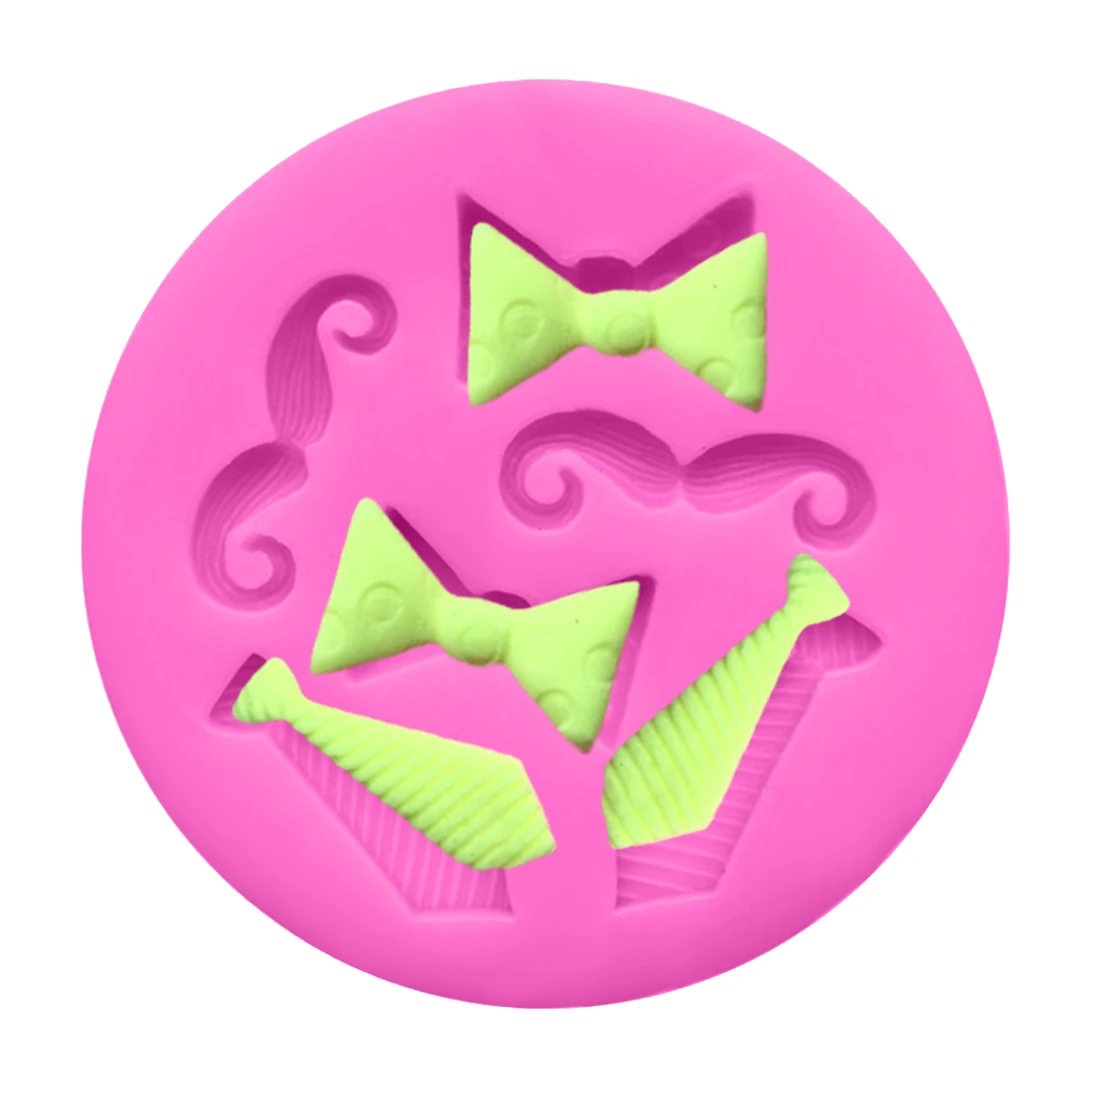 

Promotions 6-Cavity Tiny Bow Tie Mustache Cake Tools Silicone Mold for Fondant Sugarcraft Mould Gum Paste Chocolate Craft